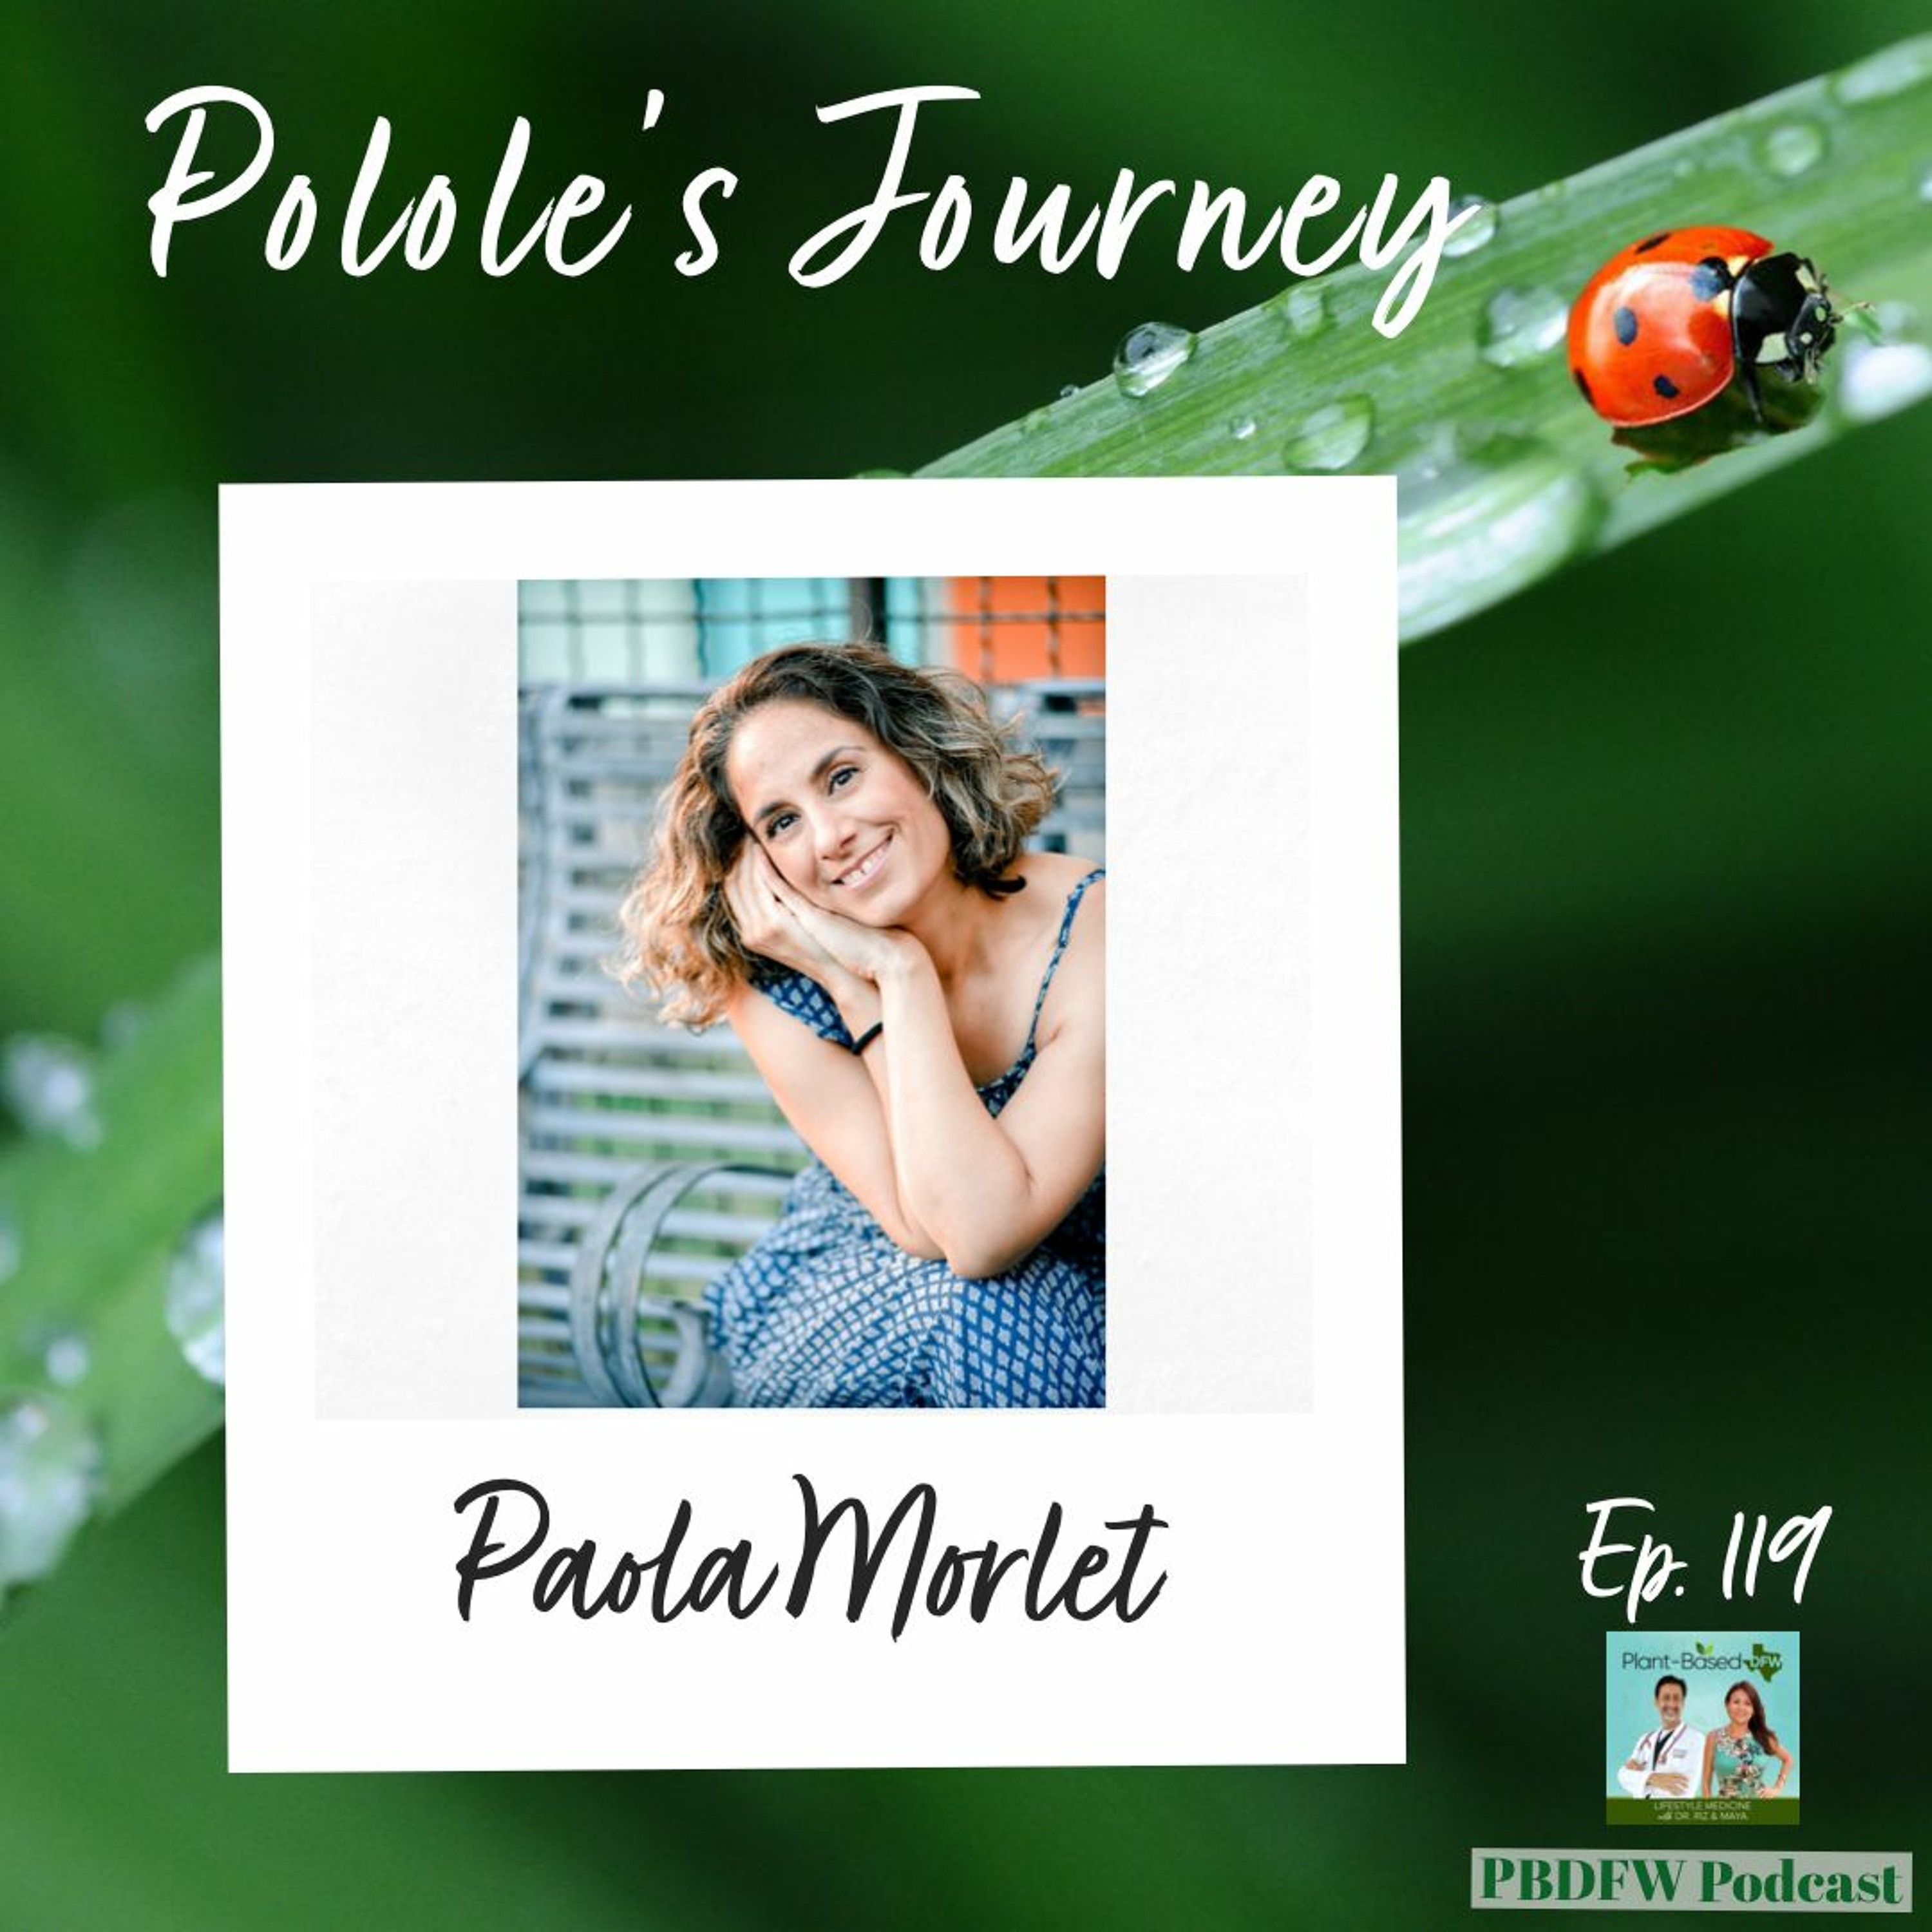 119: Polole's Journey with Paola Morlet (Eng/Spa)